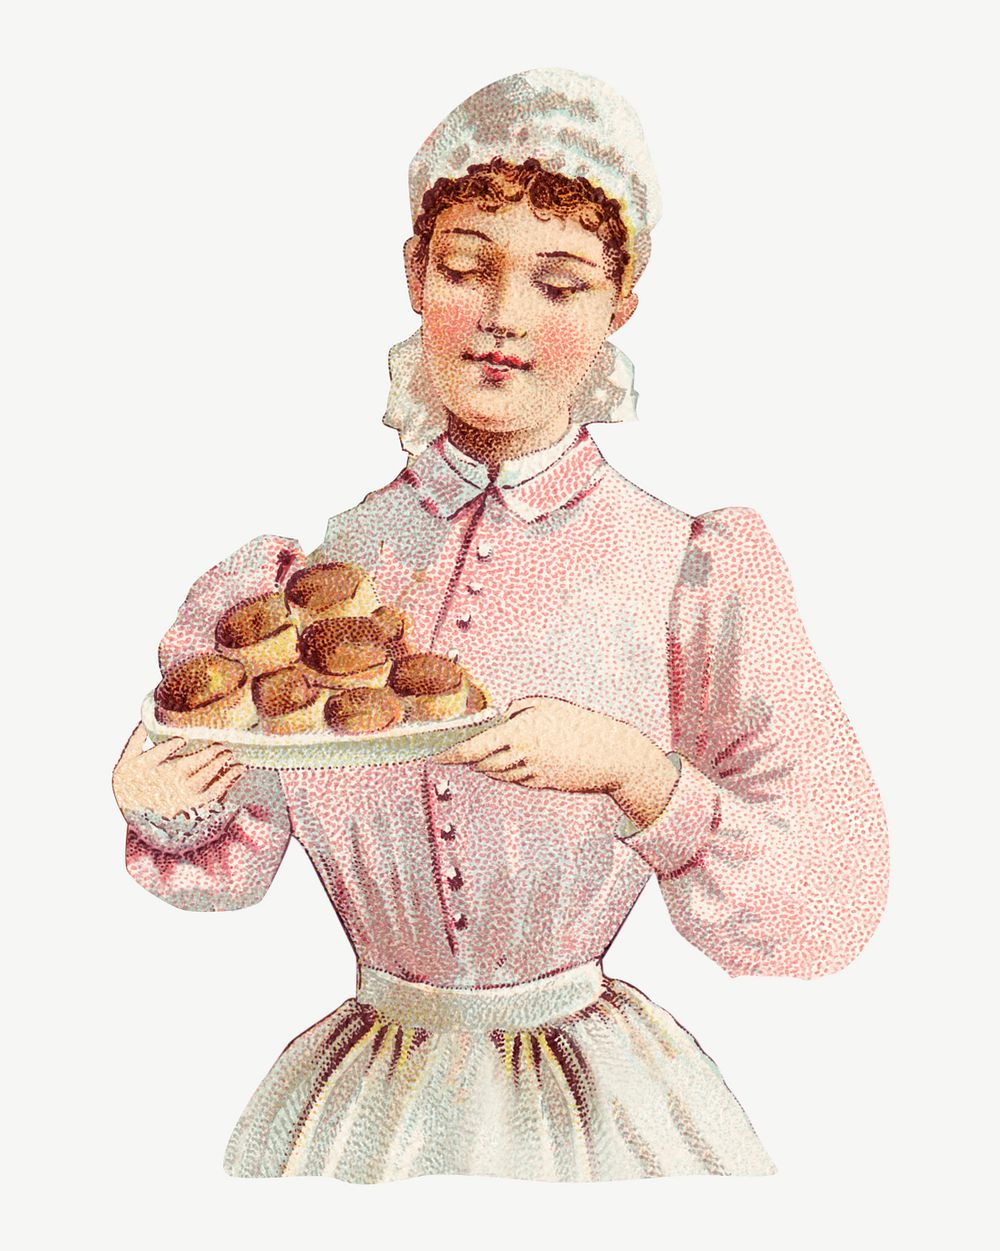 Woman holding pastry plate, vintage illustration psd. Remixed by rawpixel.